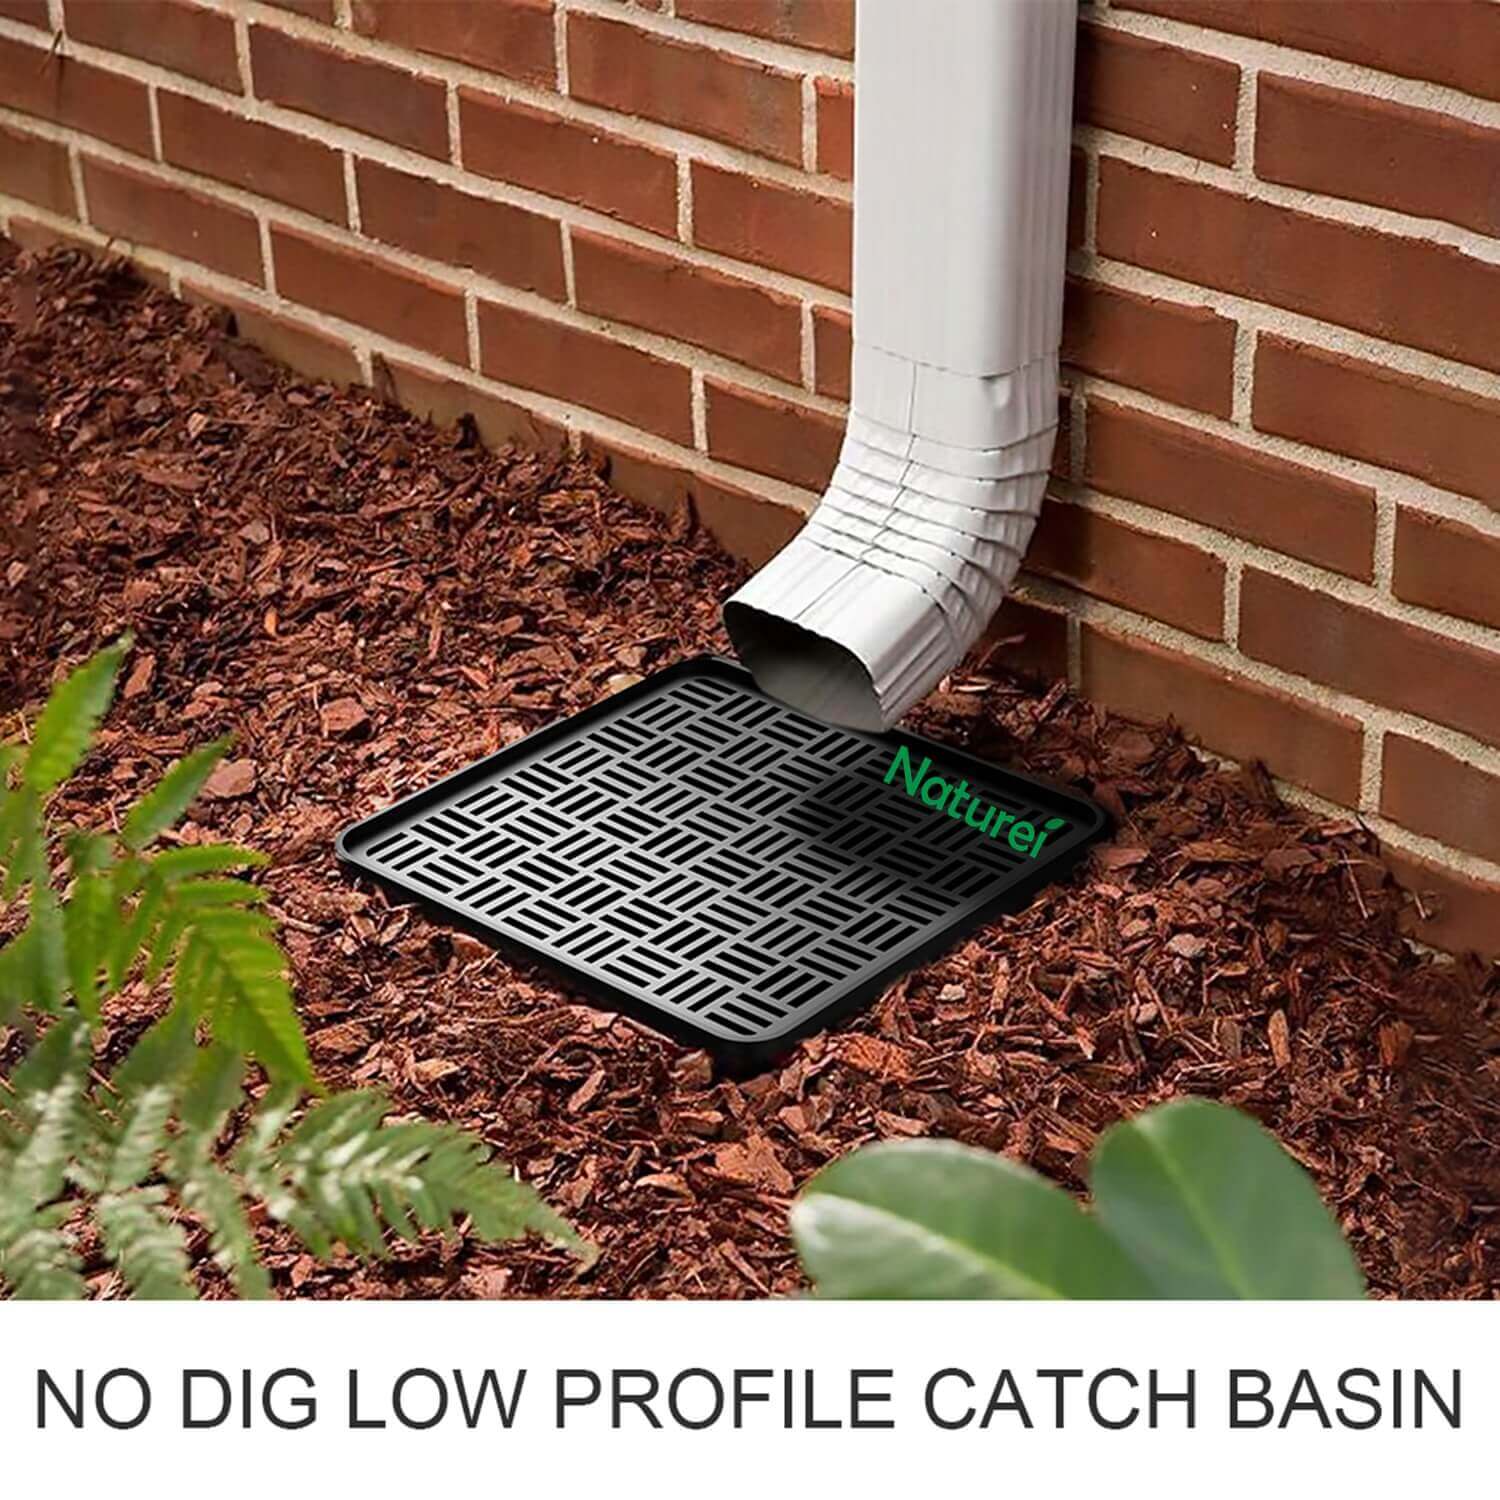 Catch Basin Drainage: Essential for Effective Stormwater Management